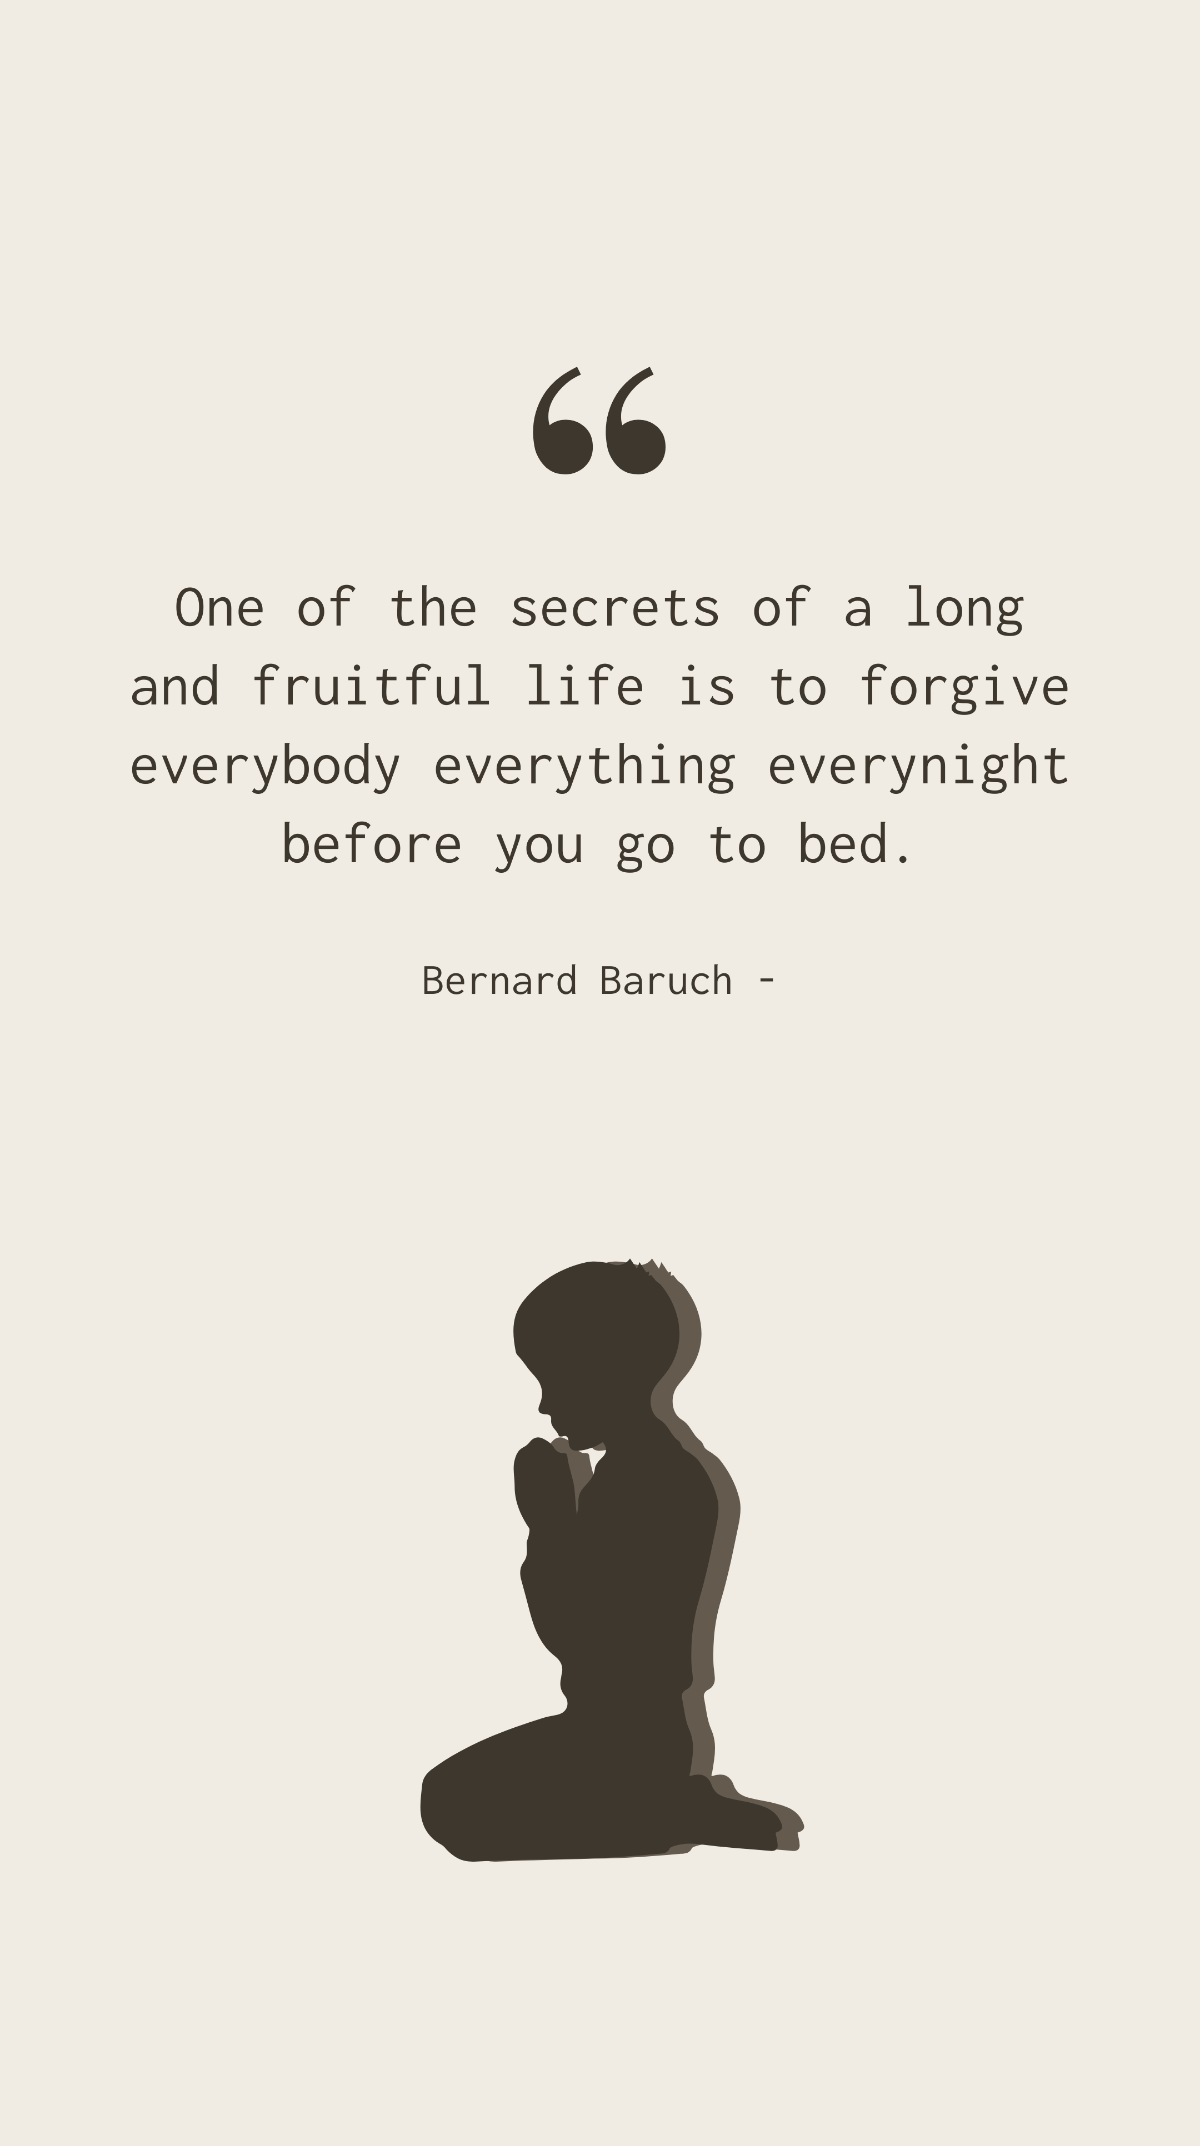 Free Bernard Baruch - One of the secrets of a long and fruitful life is to forgive everybody everything everynight before you go to bed. Template